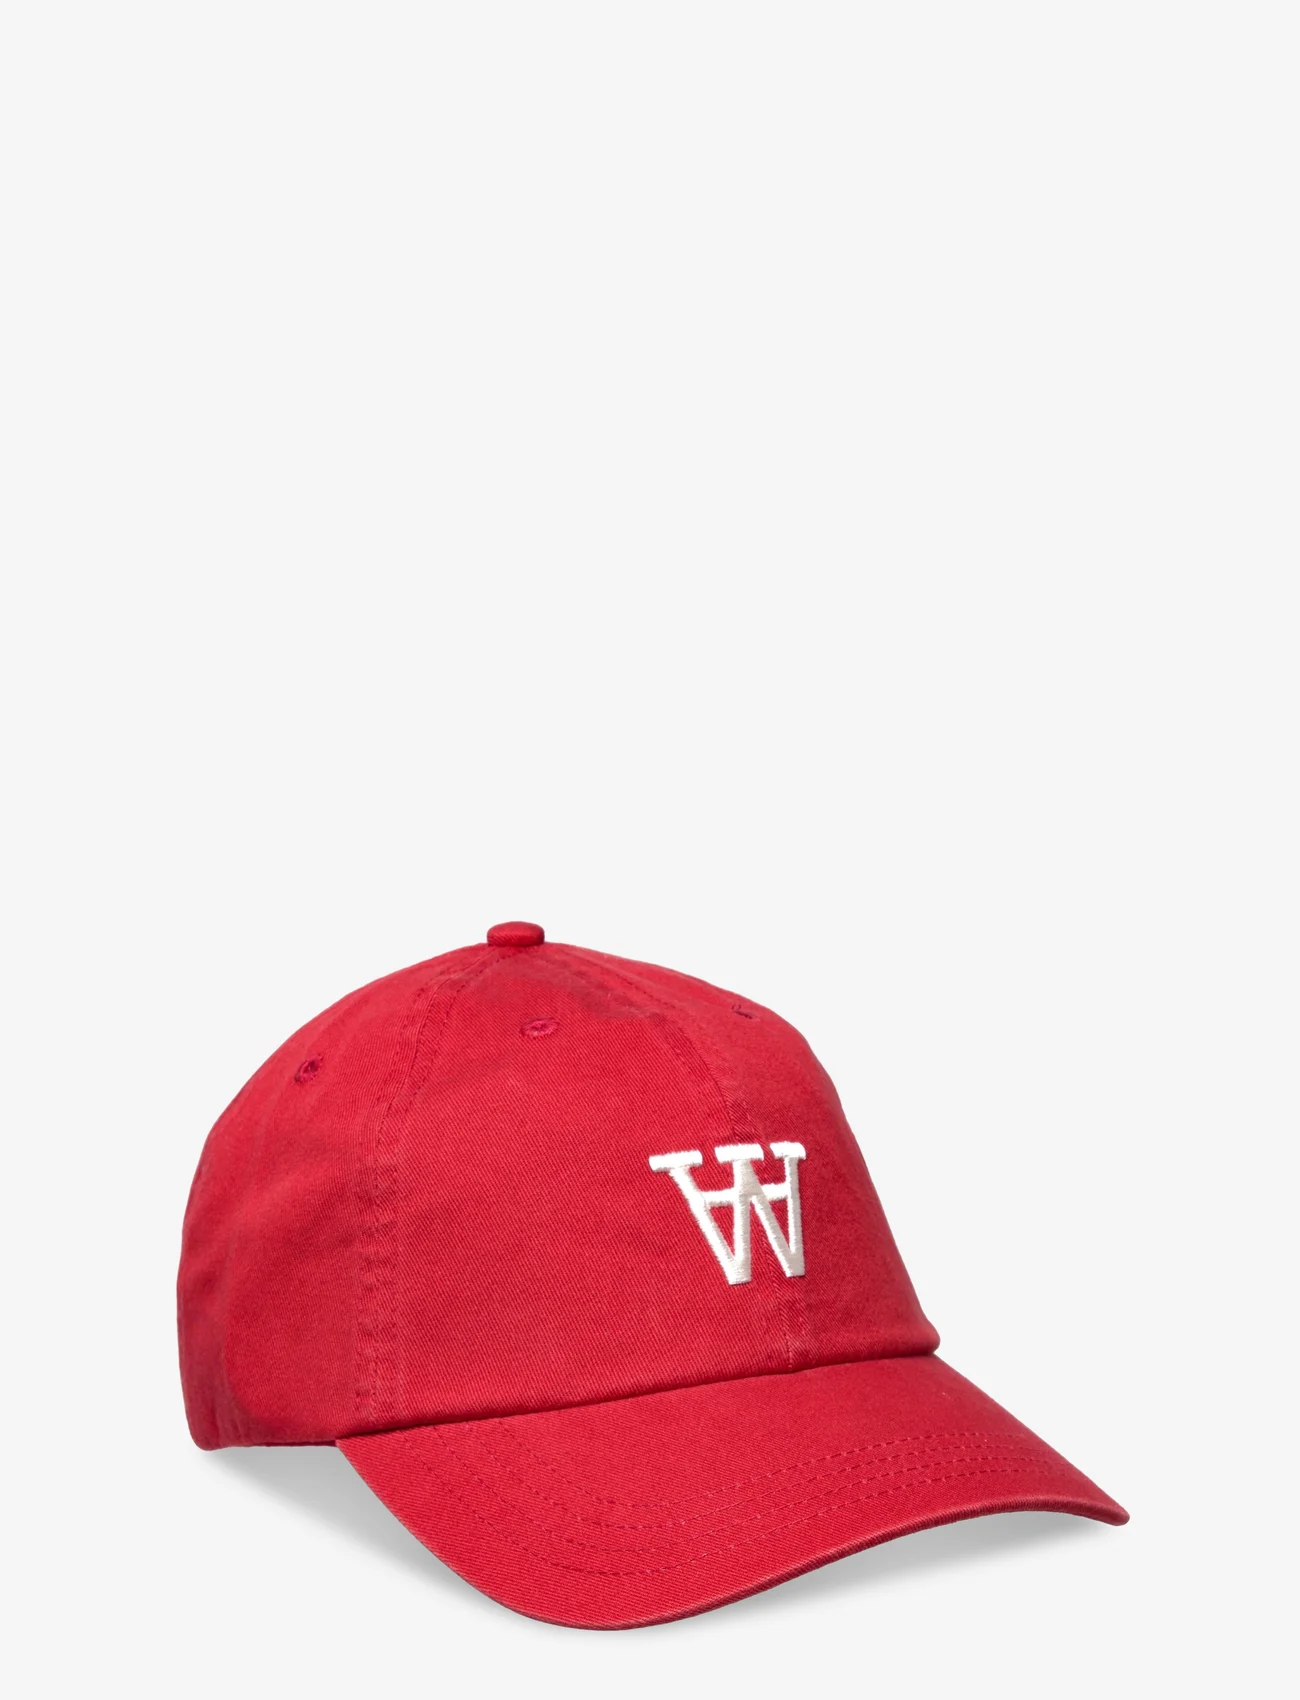 Double A by Wood Wood - Eli AA cap - caps - chili red - 0